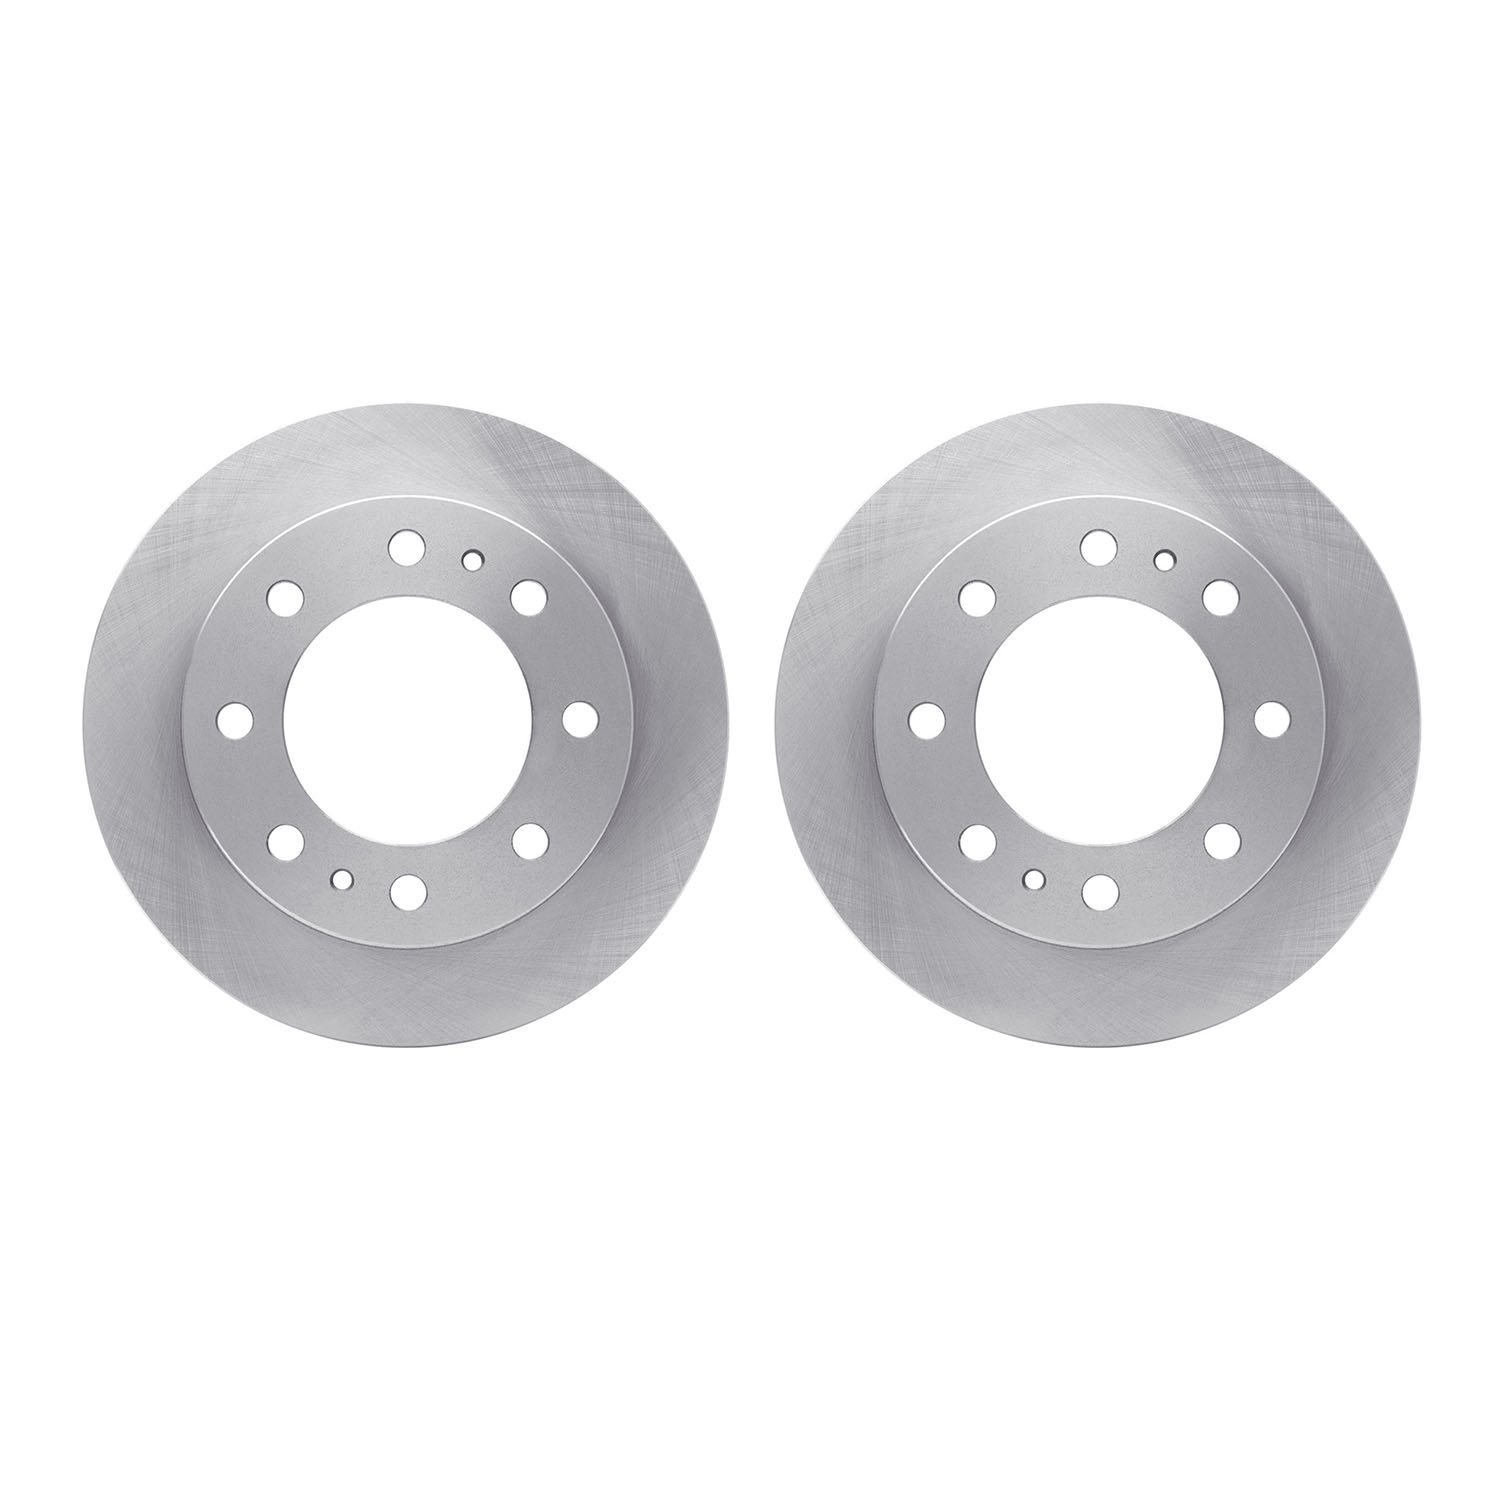 6002-48051 Brake Rotors, Fits Select GM, Position: Front